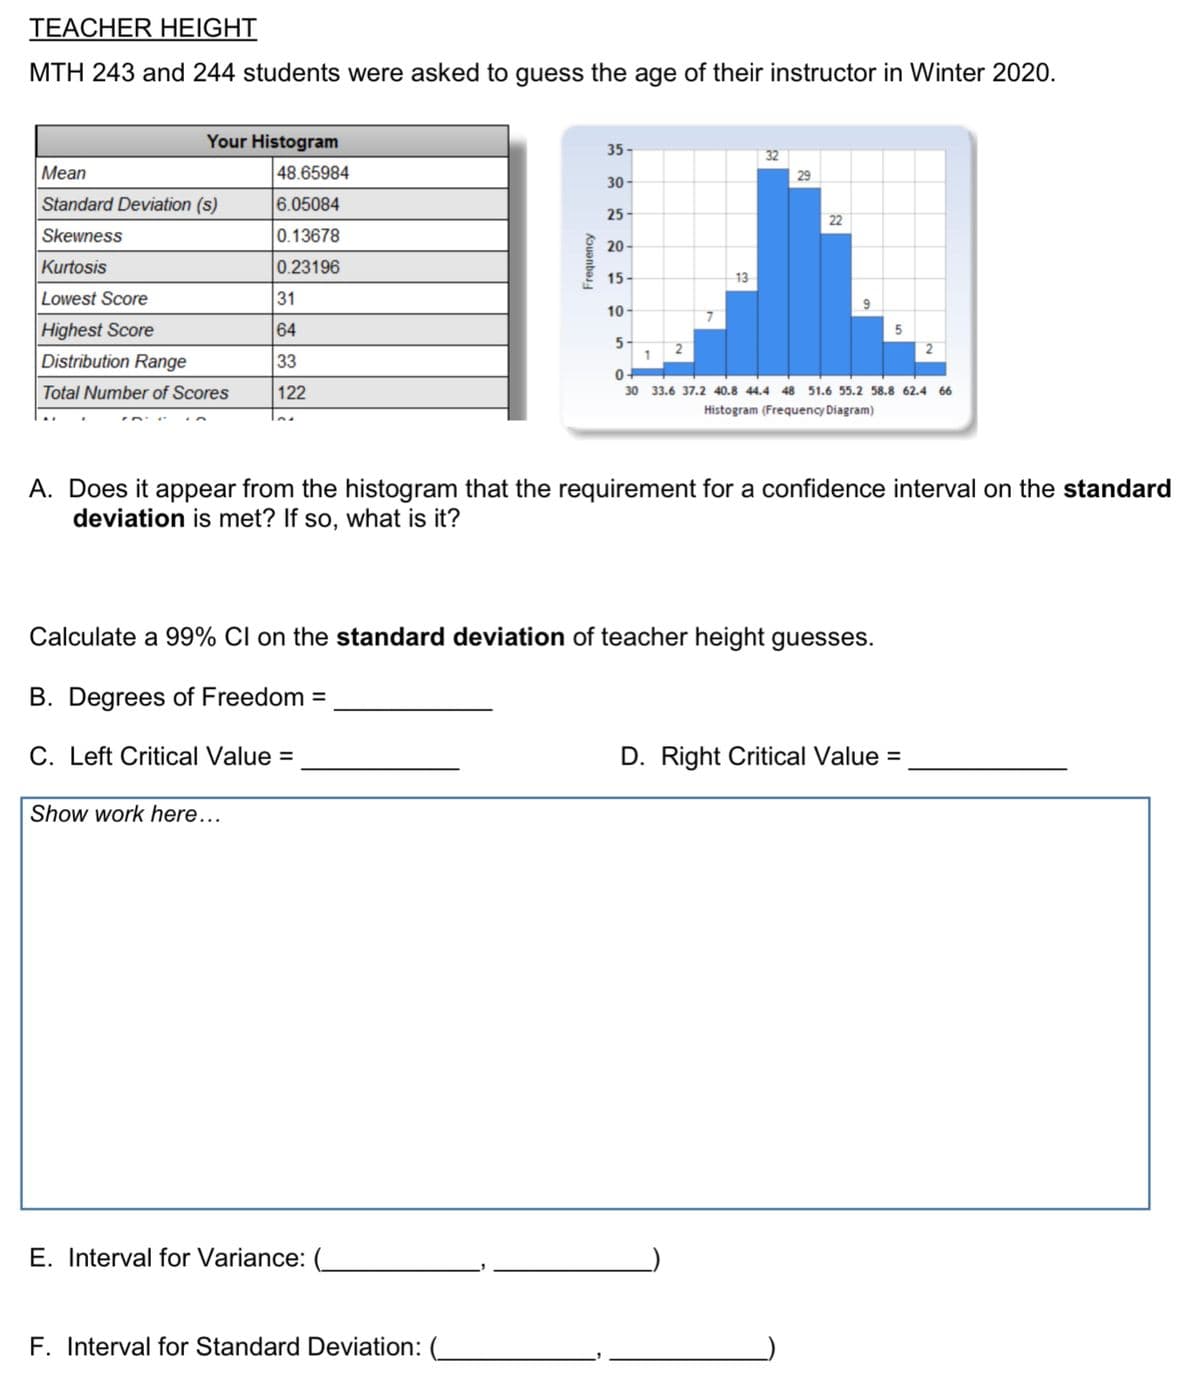 TEACHER HEIGHT
MTH 243 and 244 students were asked to guess the age of their instructor in Winter 2020.
Your Histogram
35-
32
Mean
48.65984
29
30 -
Standard Deviation (s)
6.05084
25-
22
Skewness
0.13678
20 -
Kurtosis
0.23196
15 -
13
Lowest Score
31
10 -
Highest Score
64
5
1
2
Distribution Range
33
0+
Total Number of Scores
122
30 33.6 37.2 40.8 44.4 48 51.6 55.2 58.8 62.4 66
Histogram (Frequency Diagram)
A. Does it appear from the histogram that the requirement for a confidence interval on the standard
deviation is met? If so, what is it?
Calculate a 99% CI on the standard deviation of teacher height guesses.
B. Degrees of Freedom =
C. Left Critical Value =
D. Right Critical Value =
Show work here...
E. Interval for Variance:
F. Interval for Standard Deviation: (_
Frequency
